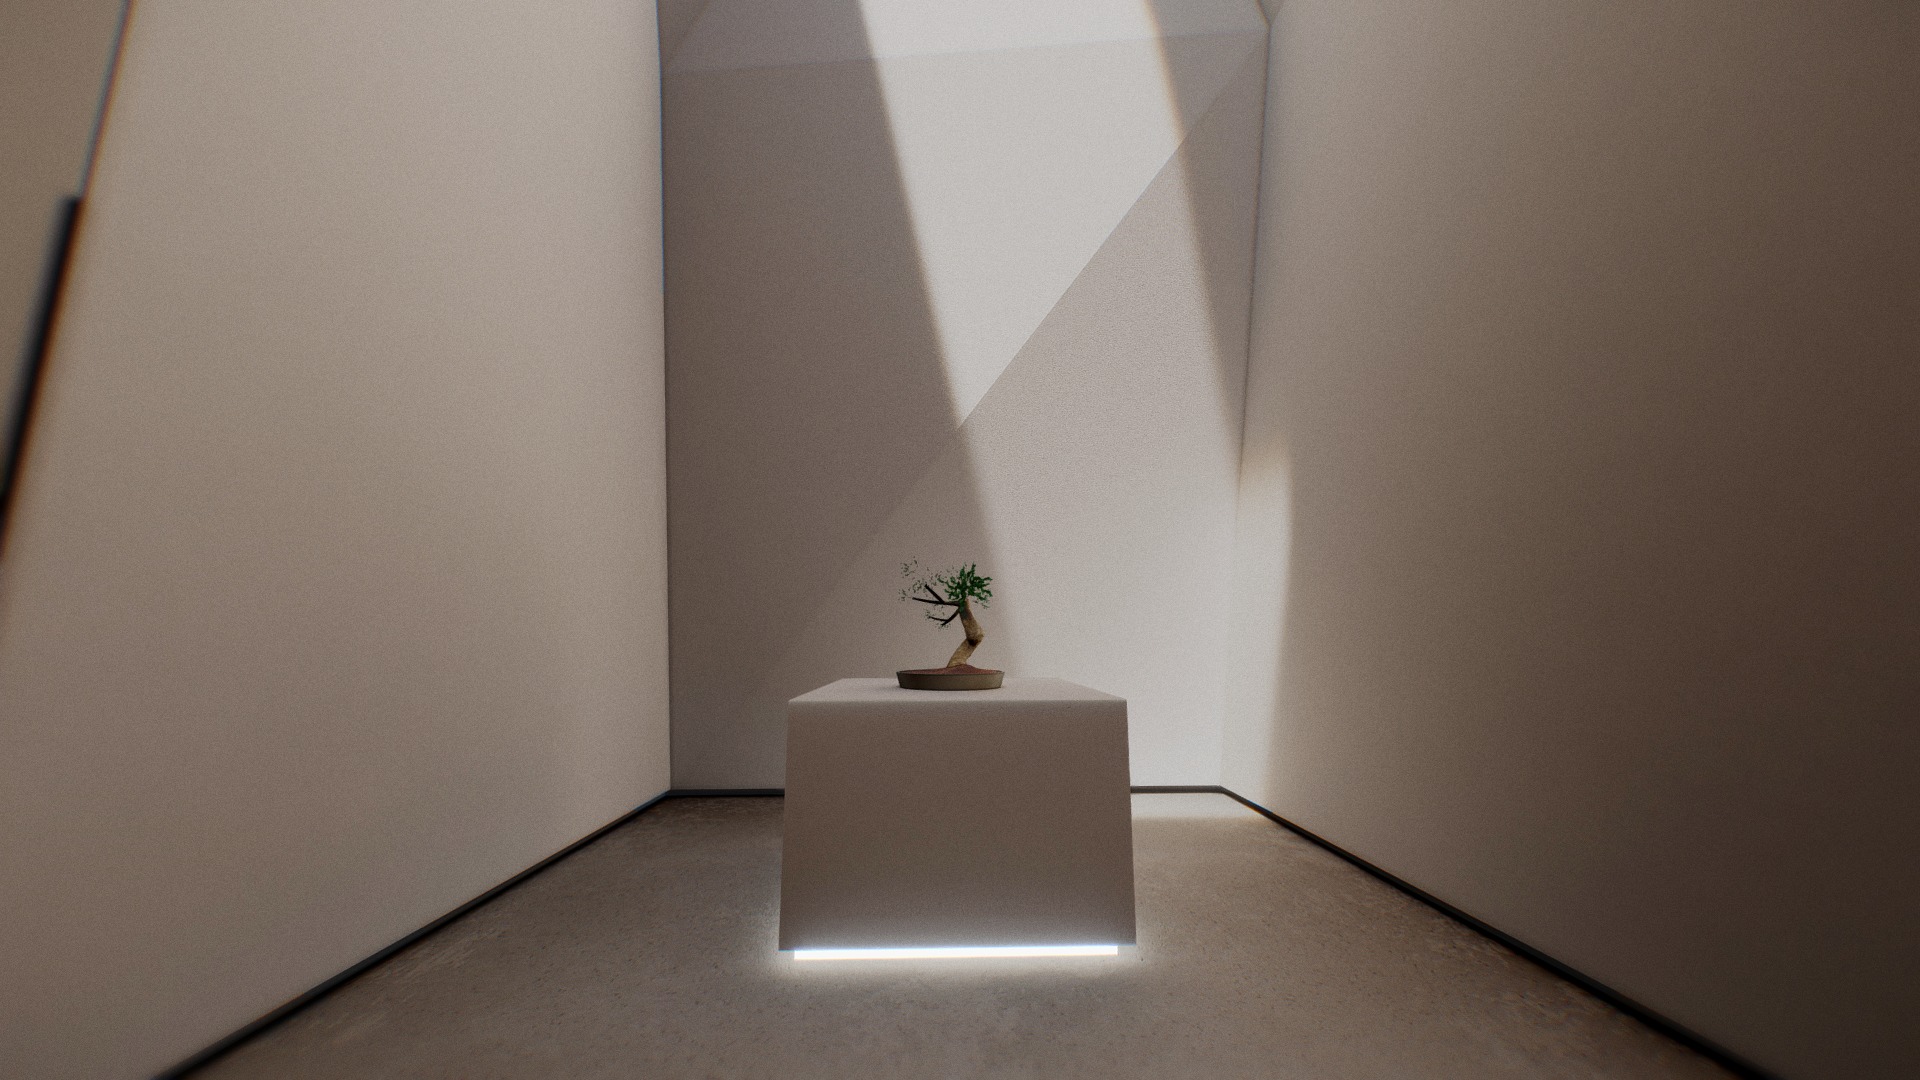 3D model VR Zen Showroom & Art Gallery 2019 - This is a 3D model of the VR Zen Showroom & Art Gallery 2019. The 3D model is about a plant in a pot in a room.